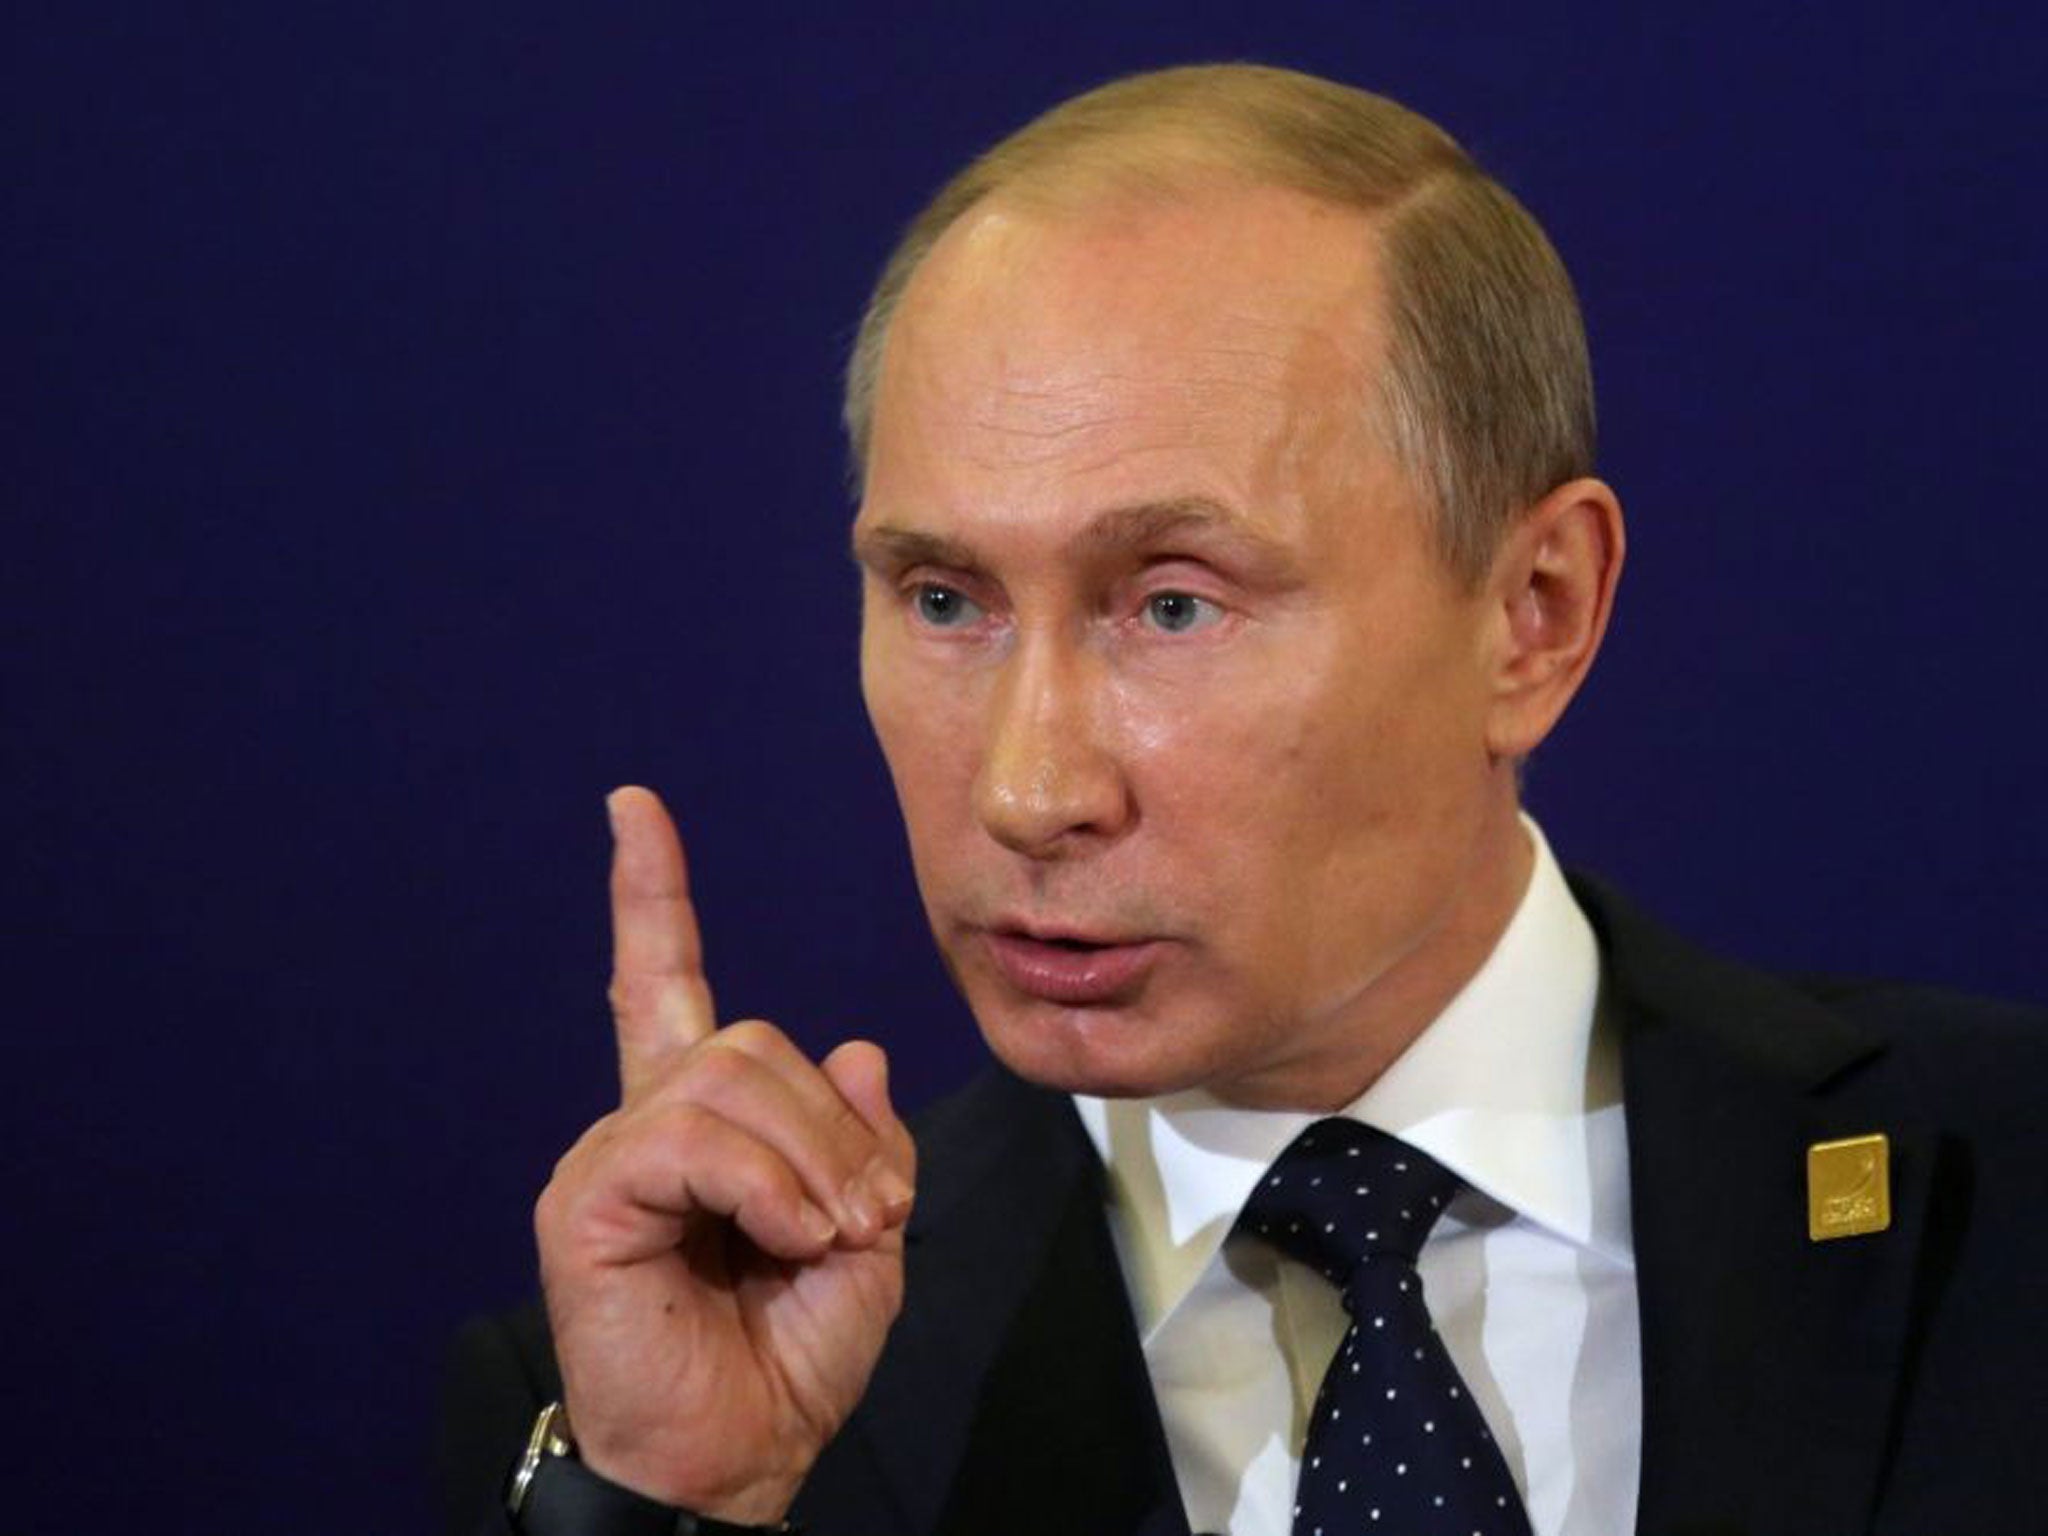 Vladimir Putin, seen here at a press conference on the last day of the Asia-Pacific Economic Cooperation (APEC) Summit in Indonesia, has demanded an apology from the Netherlands over the arrest of a Russian diplomat